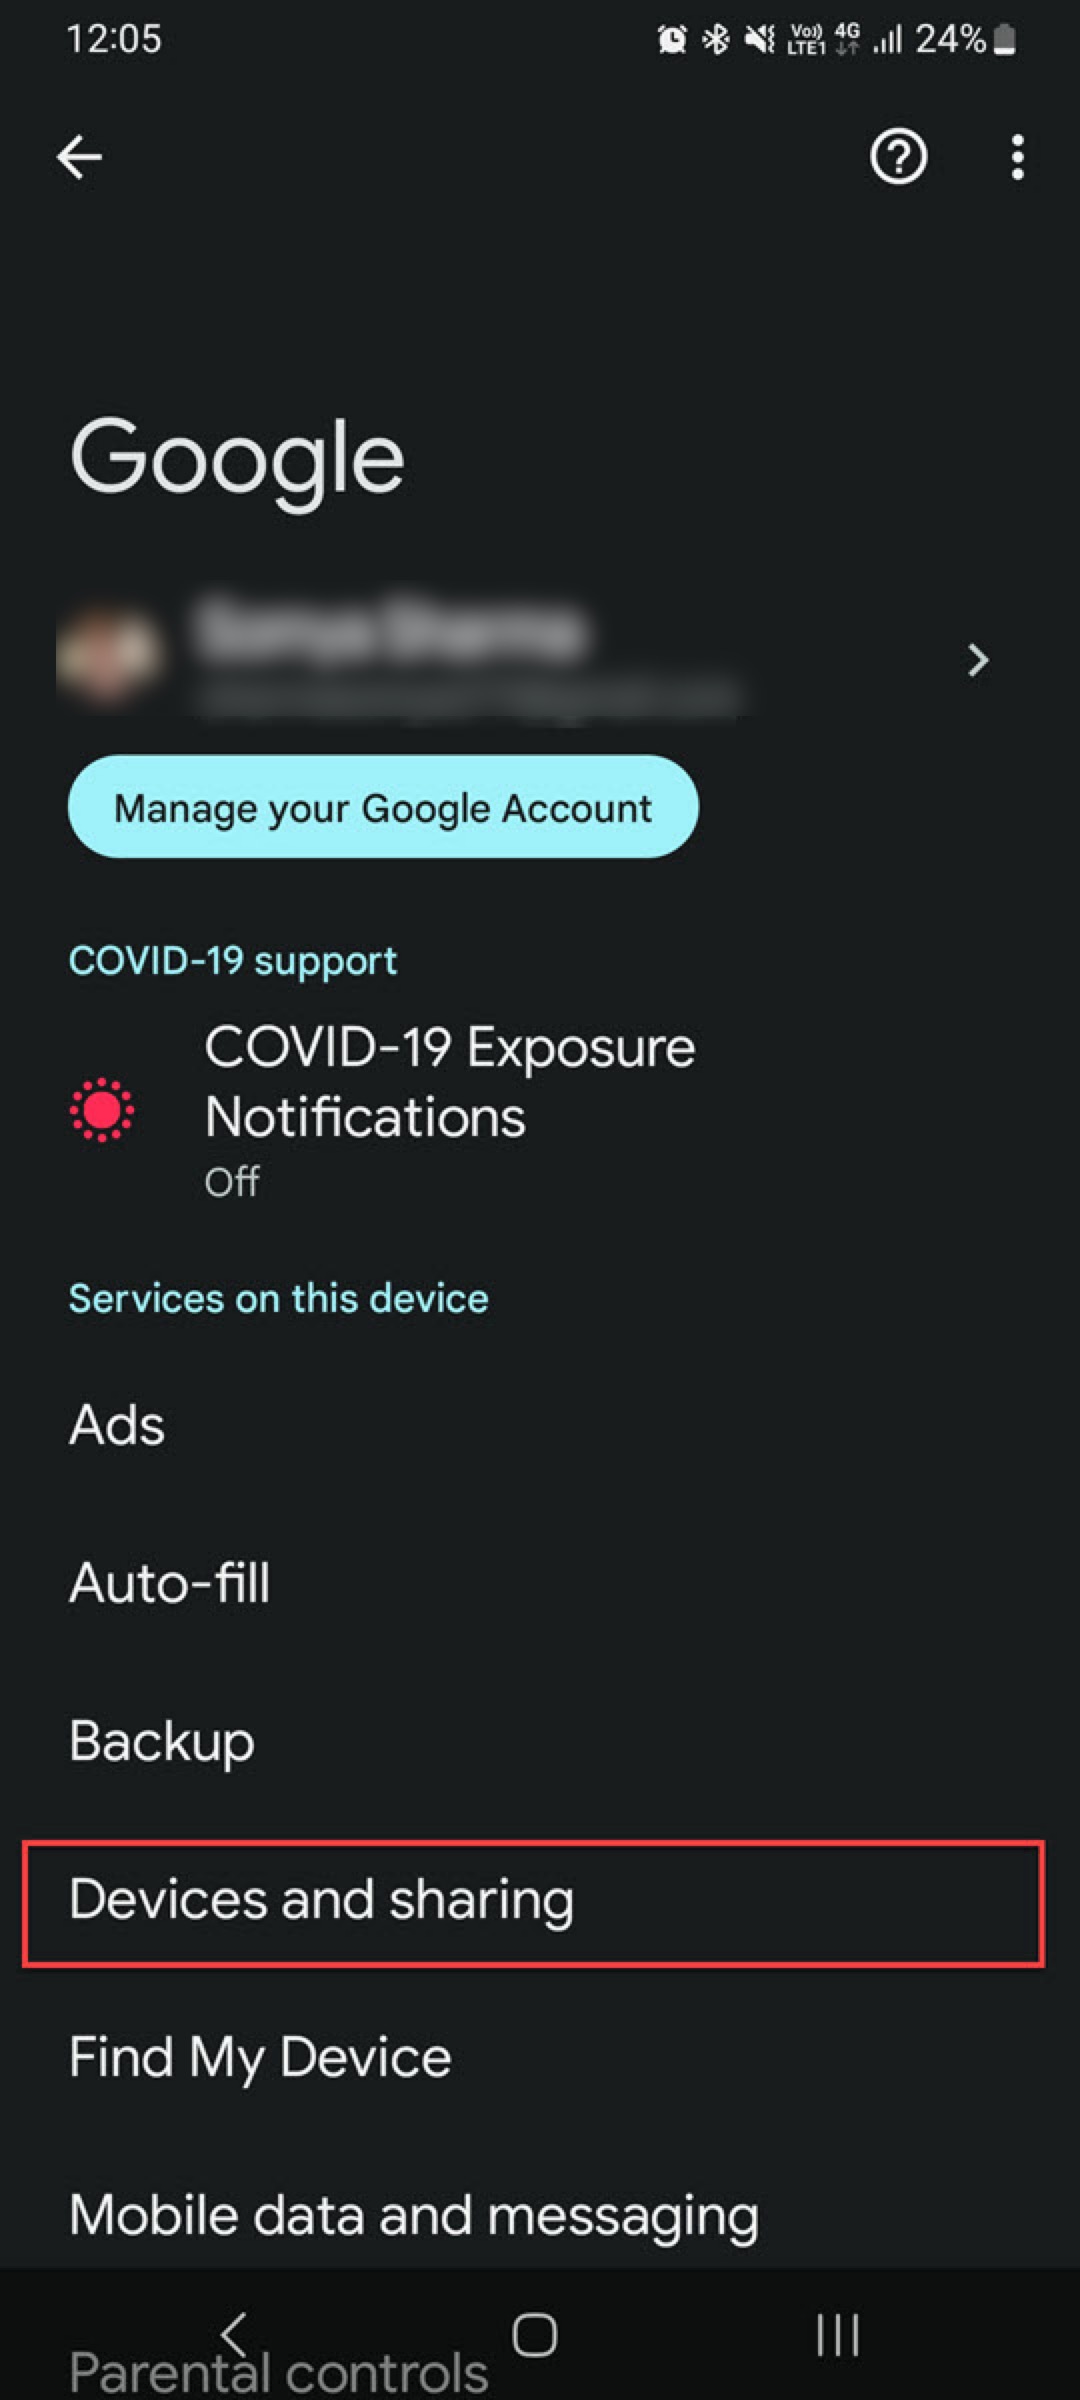 Devices and Sharing options on Android phone